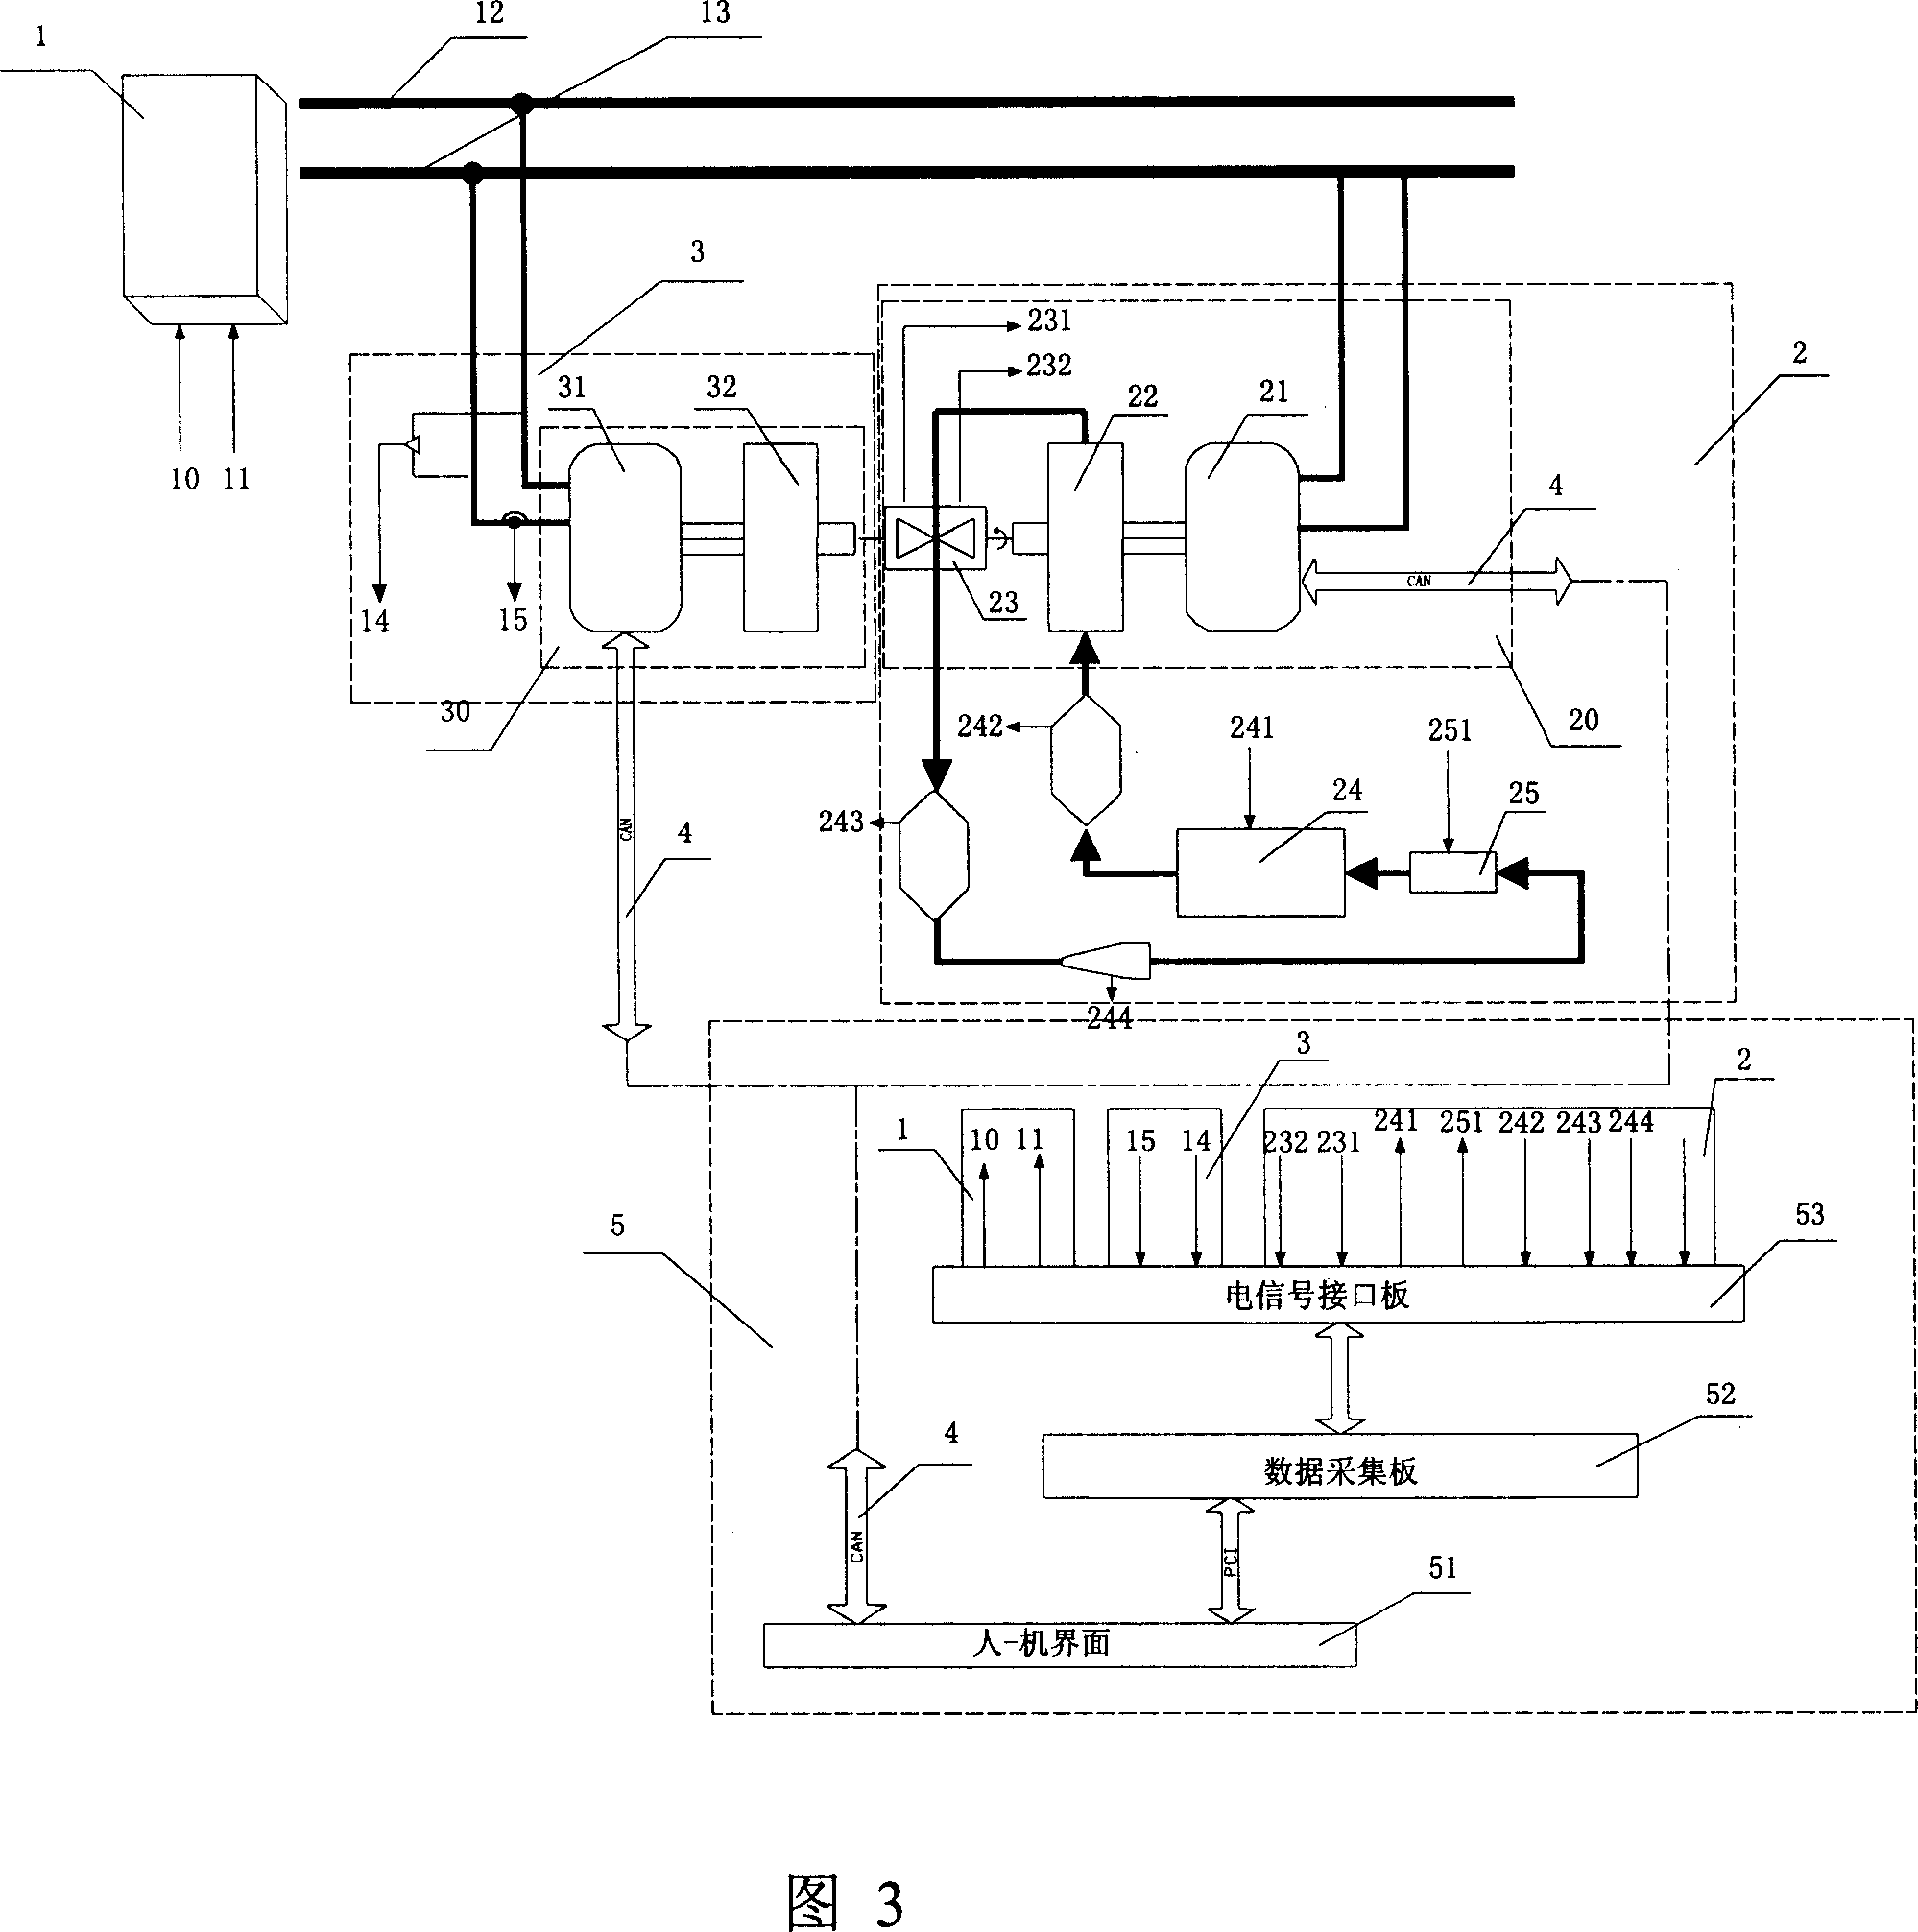 Dynamometer machine monitoring system having control and data acquisition function